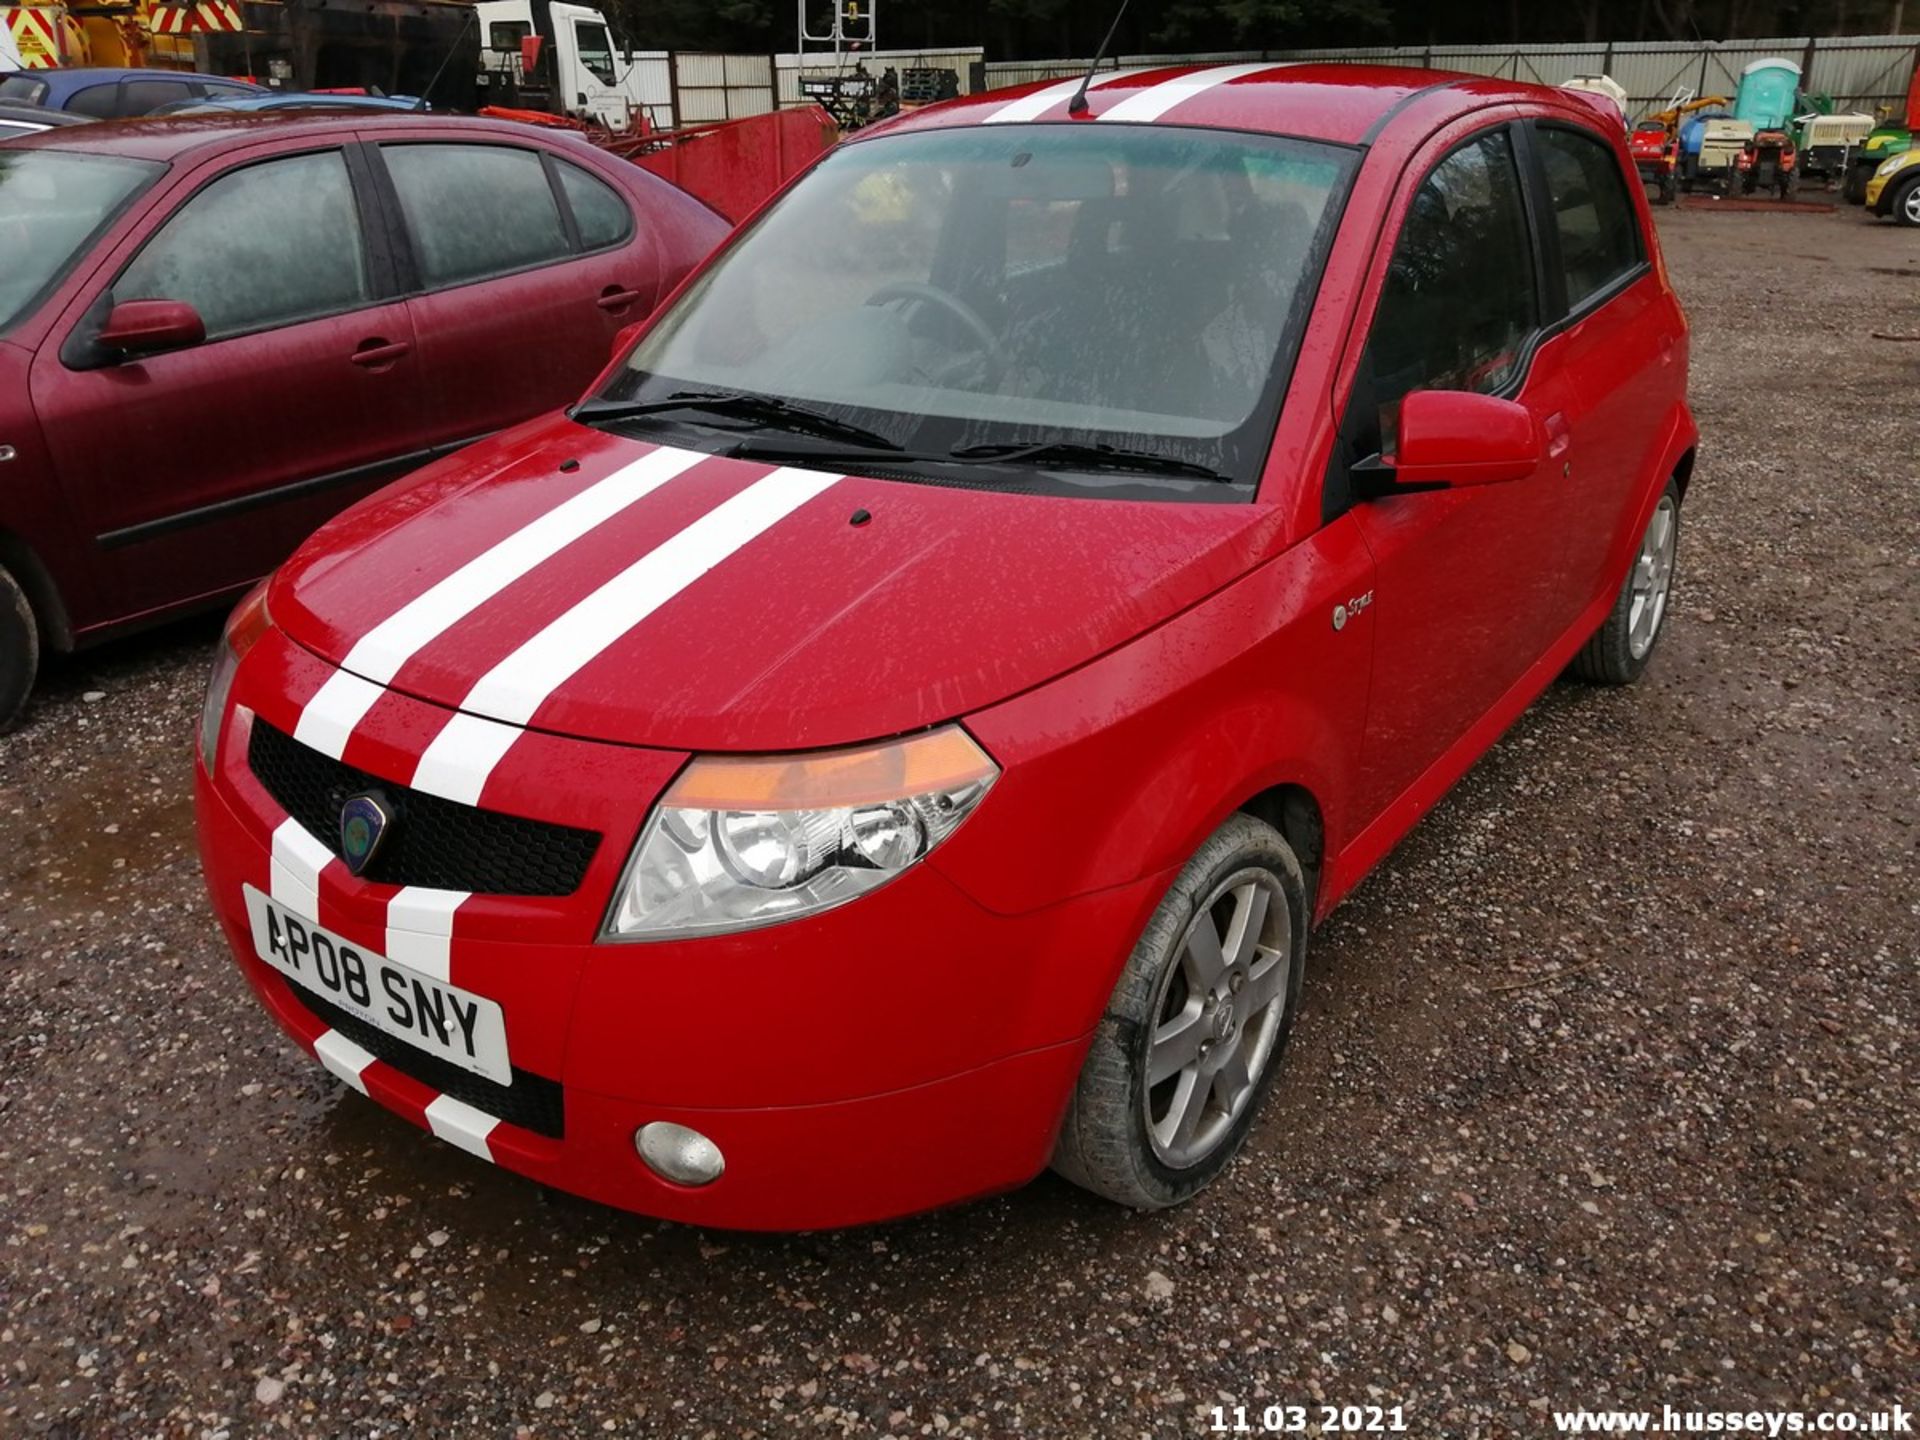 08/08 PROTON SAVVY STYLE - 1149cc 5dr Hatchback (Red, 85k) - Image 3 of 12